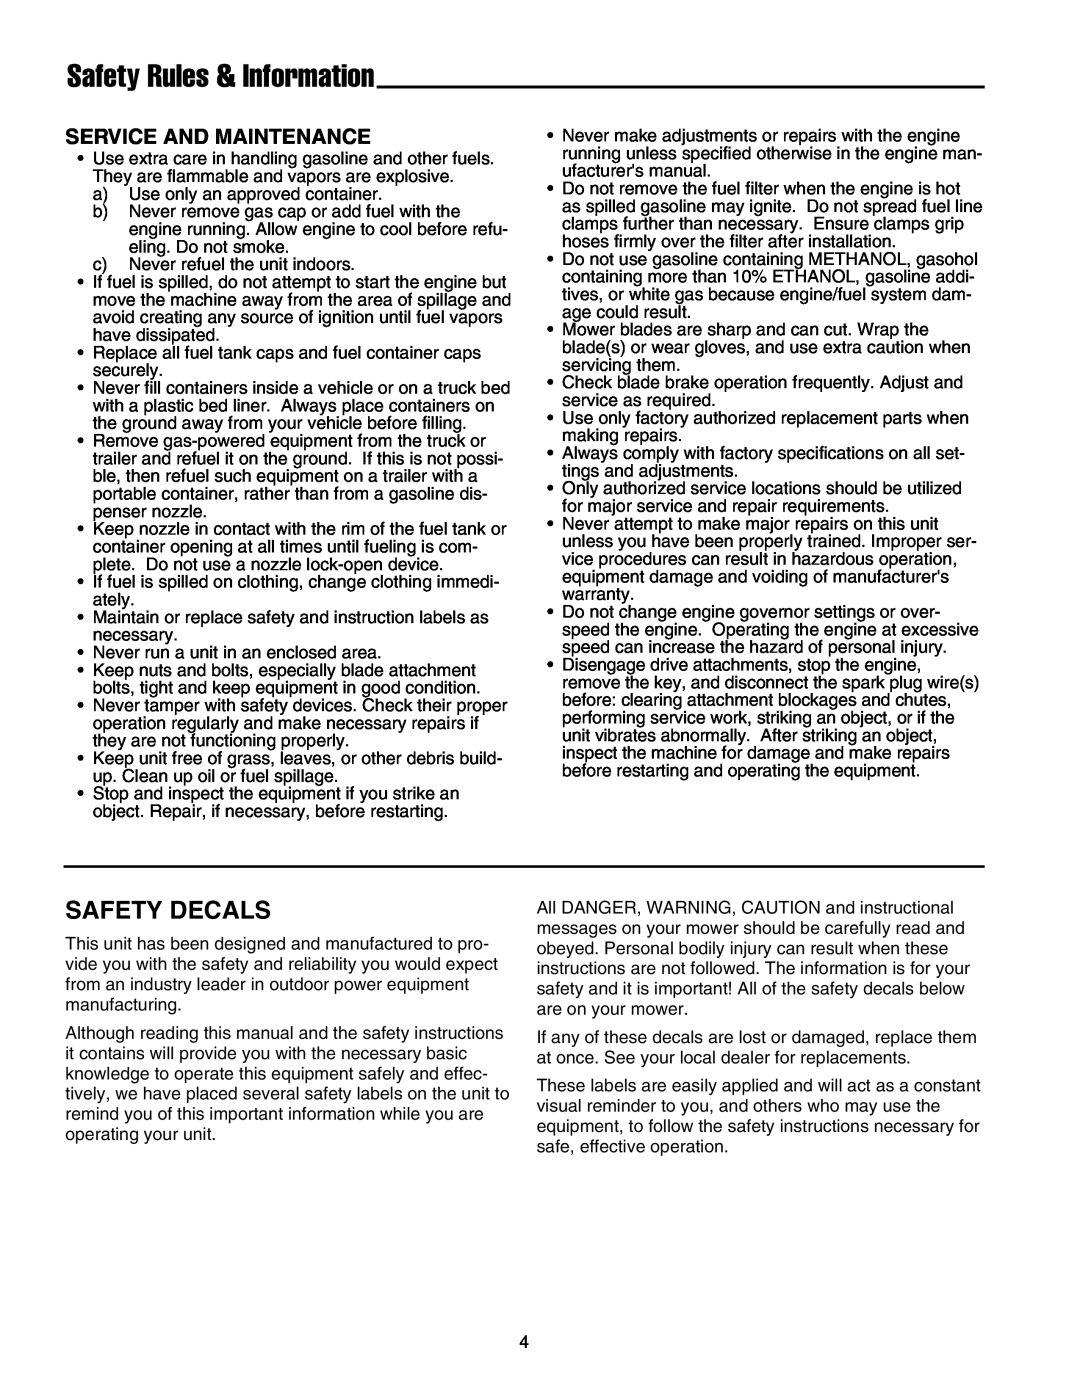 Briggs & Stratton FB13250BS manual Safety Rules & Information, Safety Decals, Service And Maintenance 